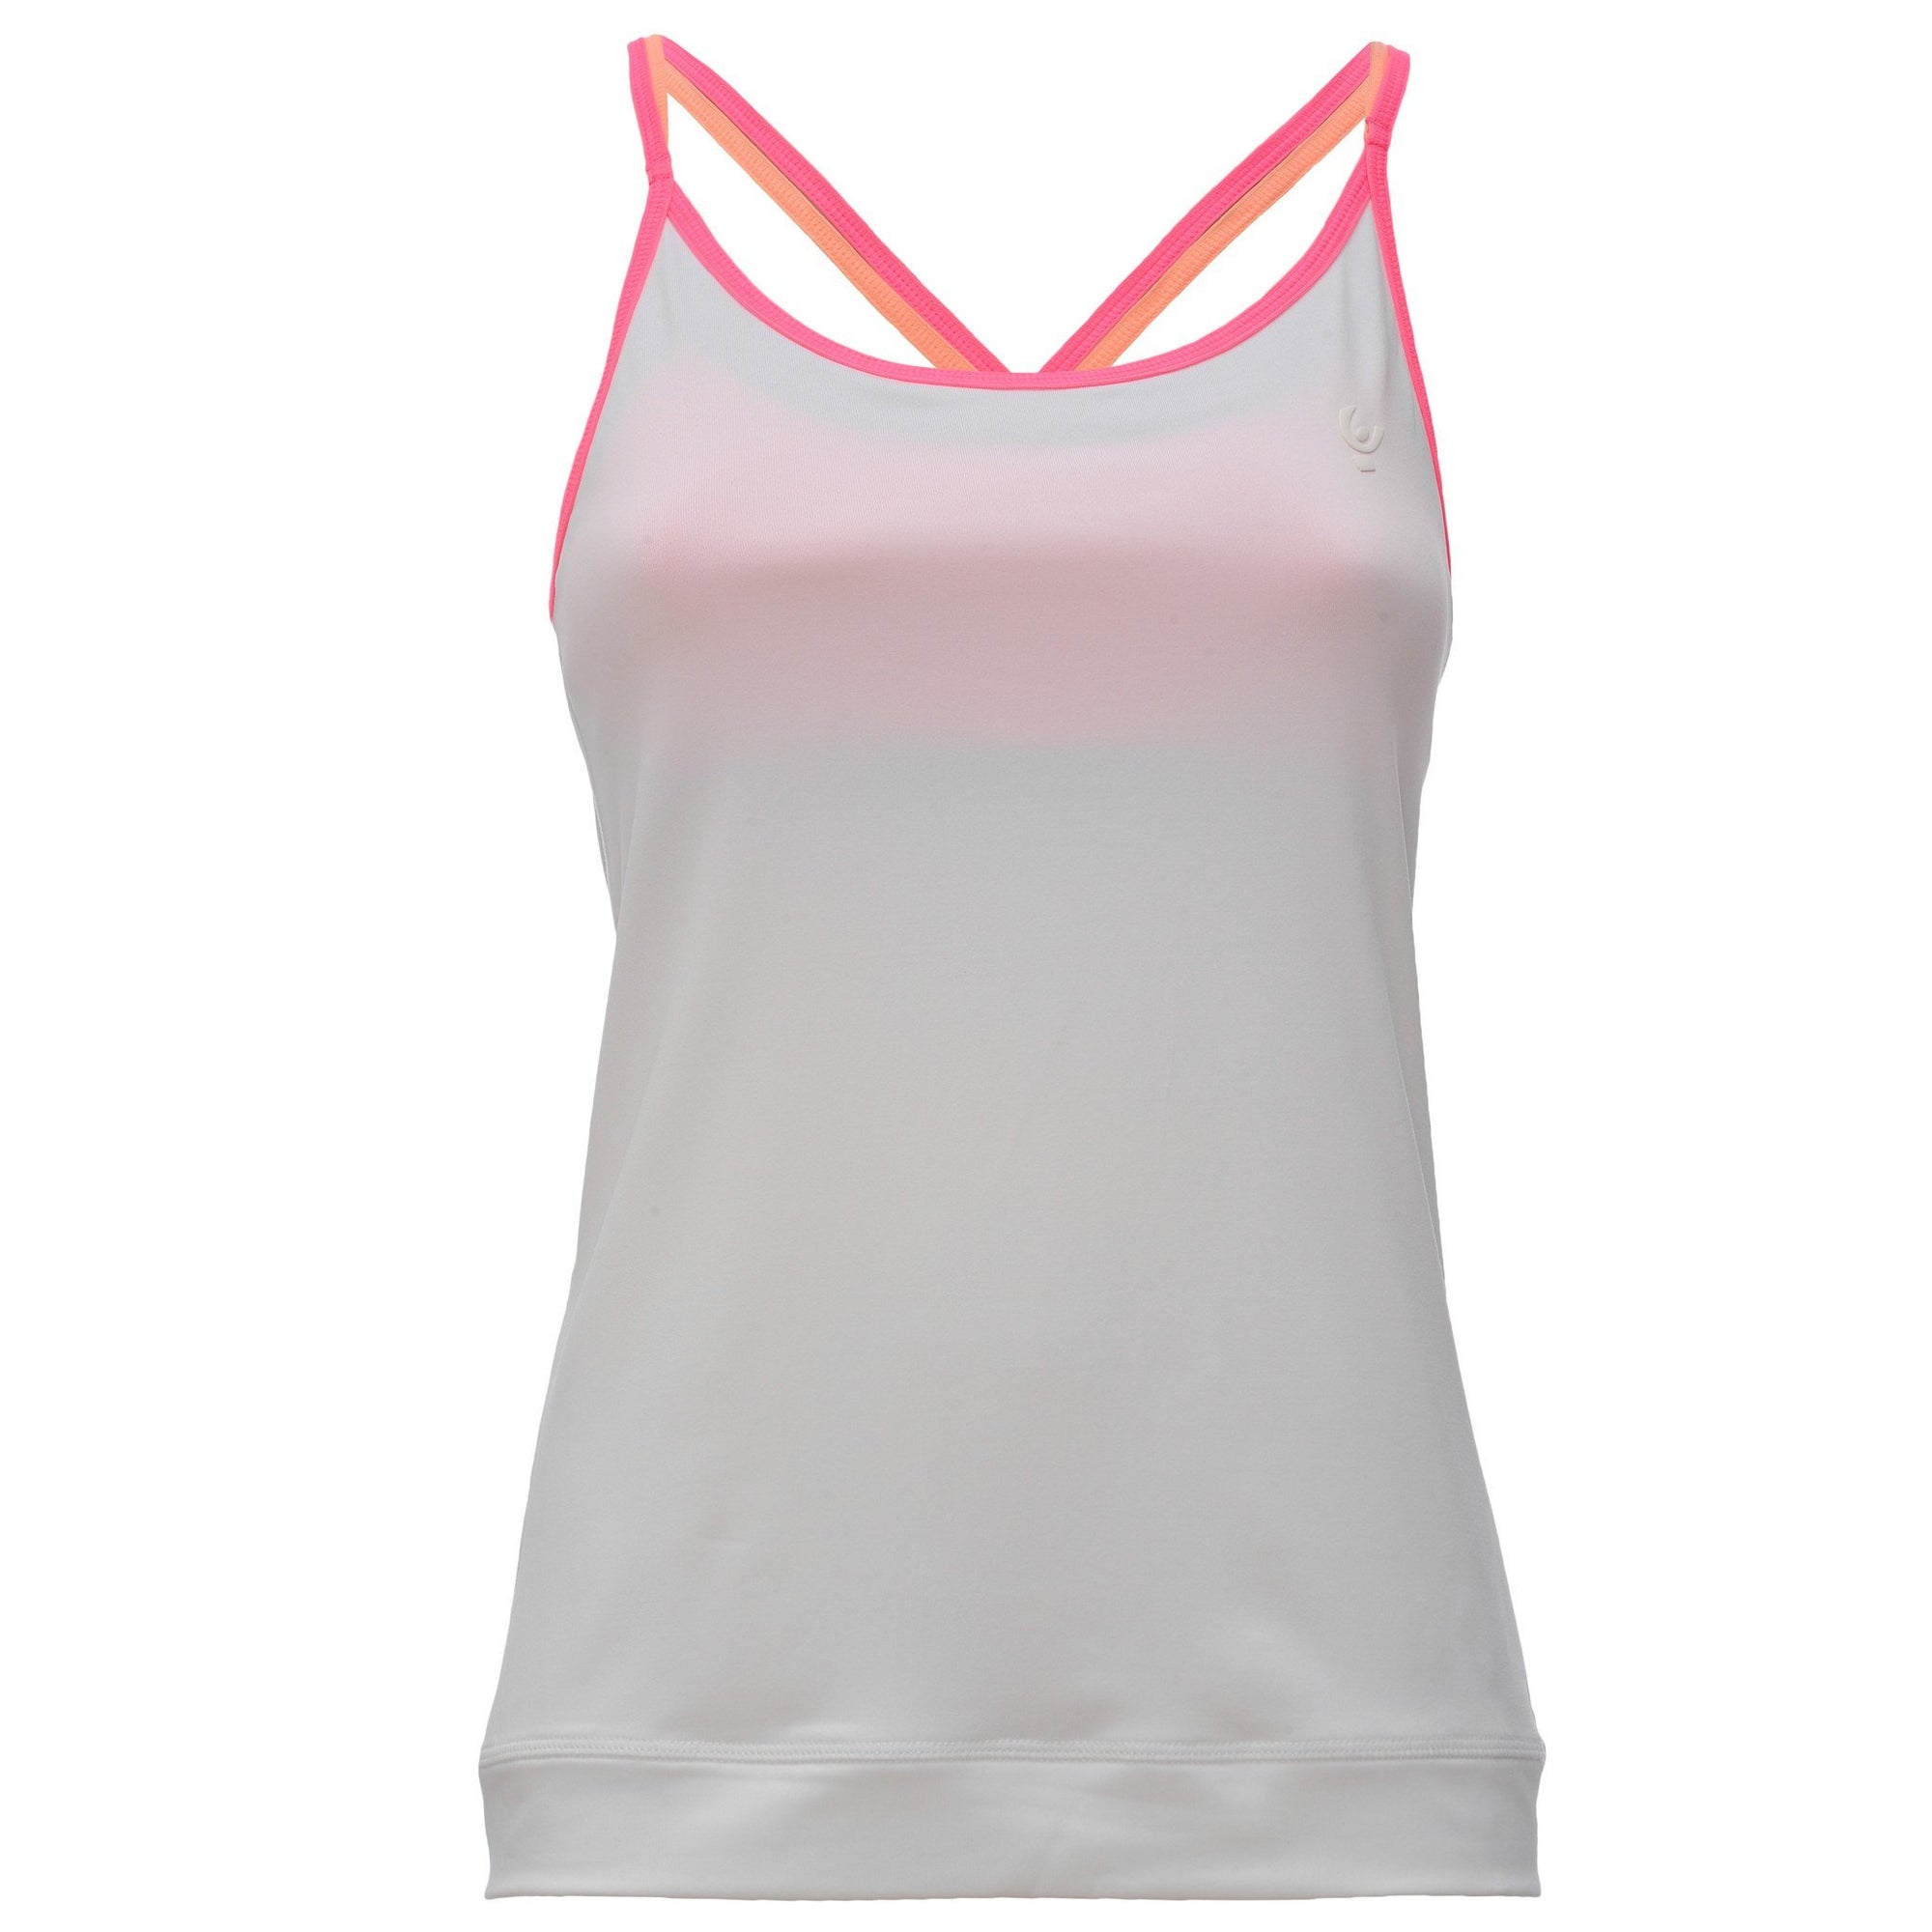 WHITE TANK TOP IN LIGHT D.I.W.O.® WITH PINK CROSSED STRAPS